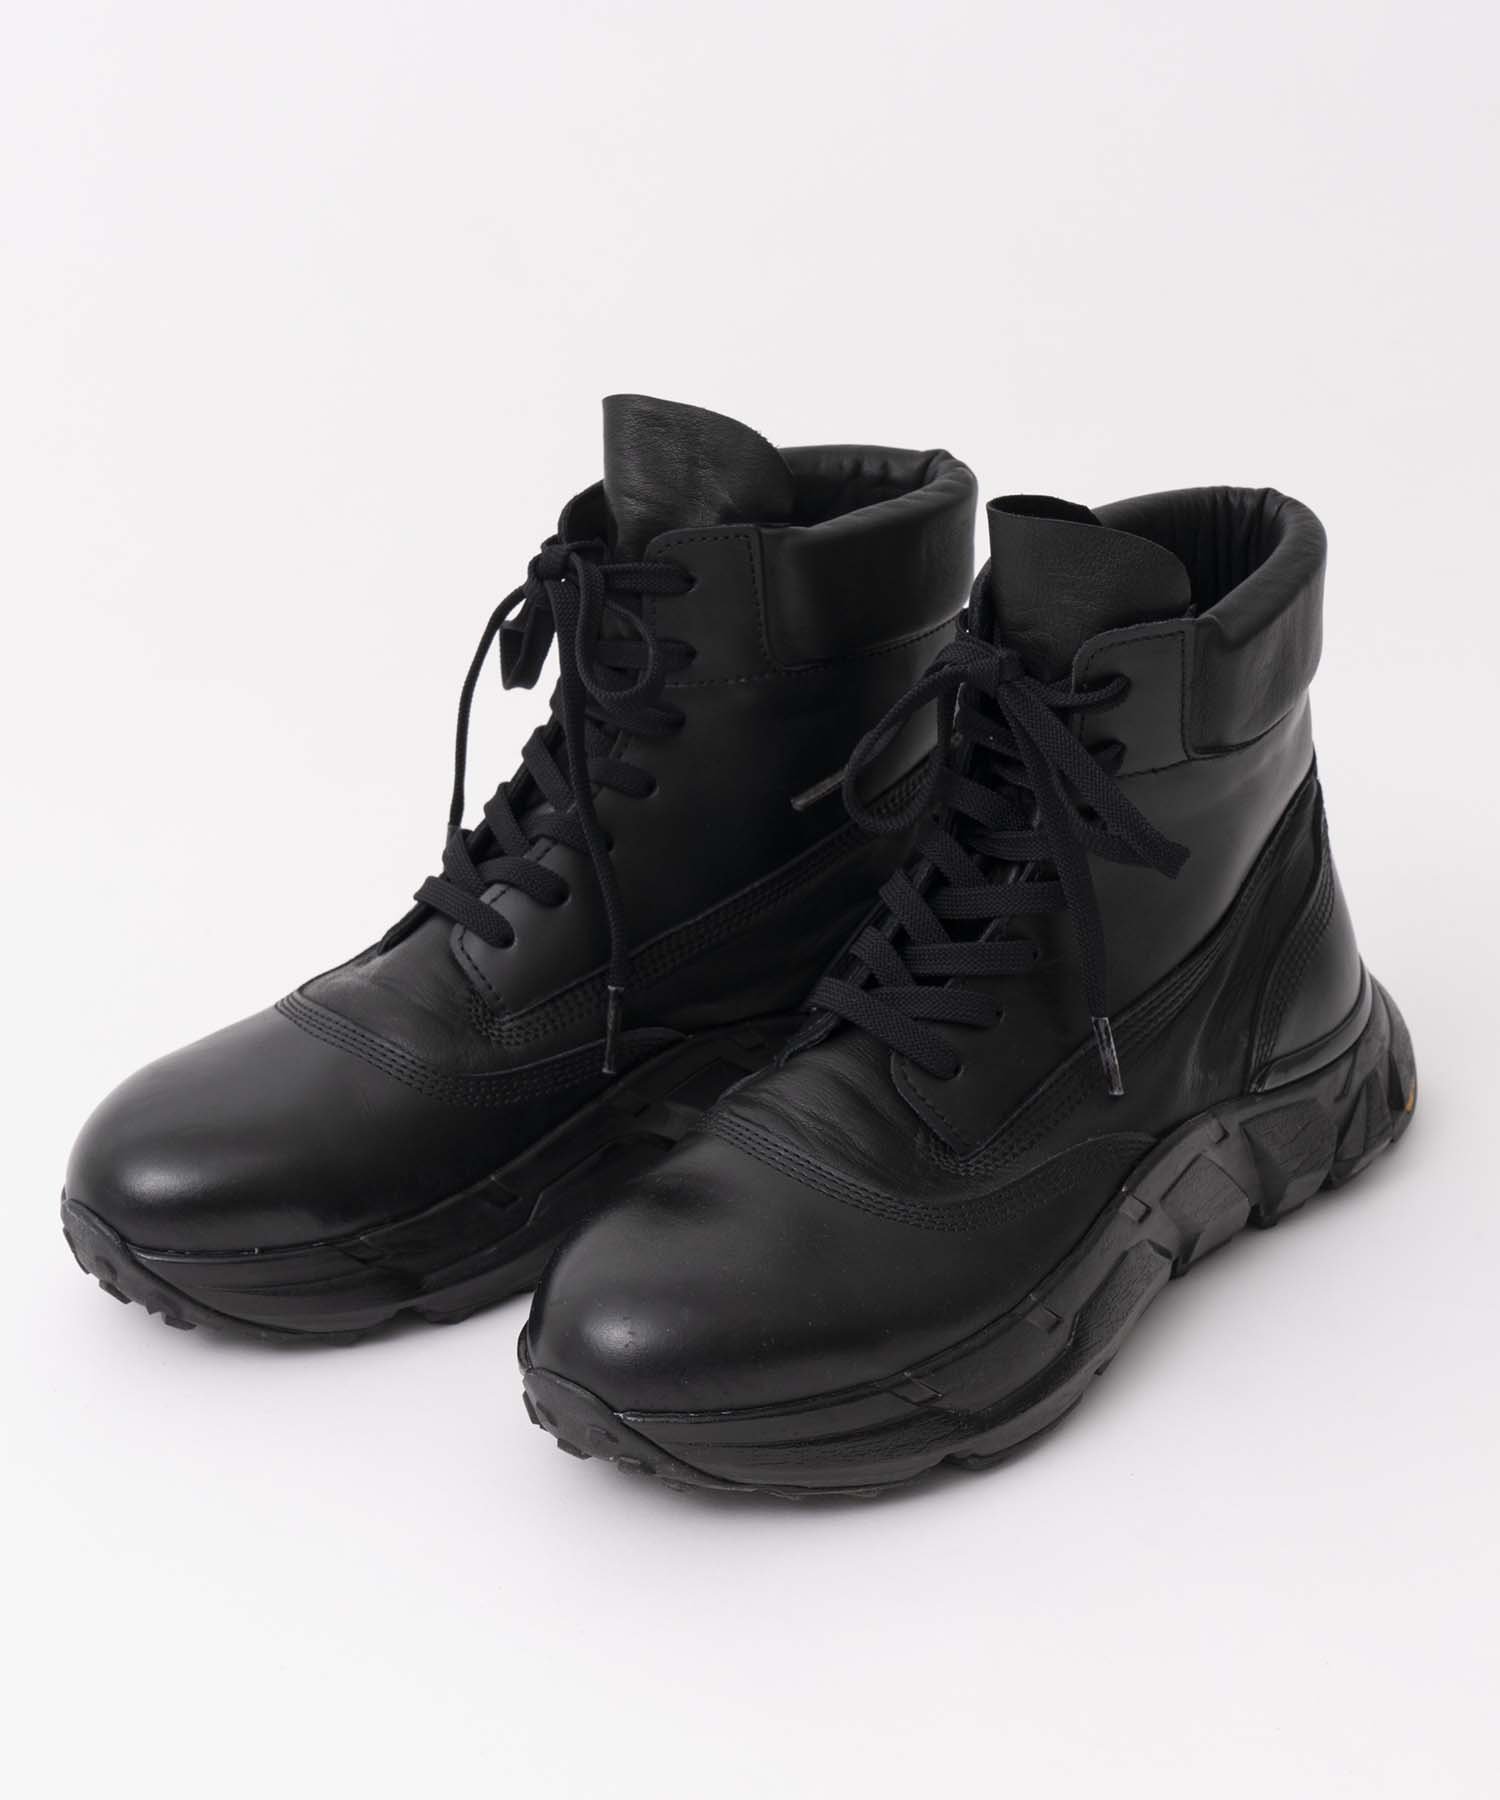 Vibram Sole Lace-Up Boots Made By TOKYO